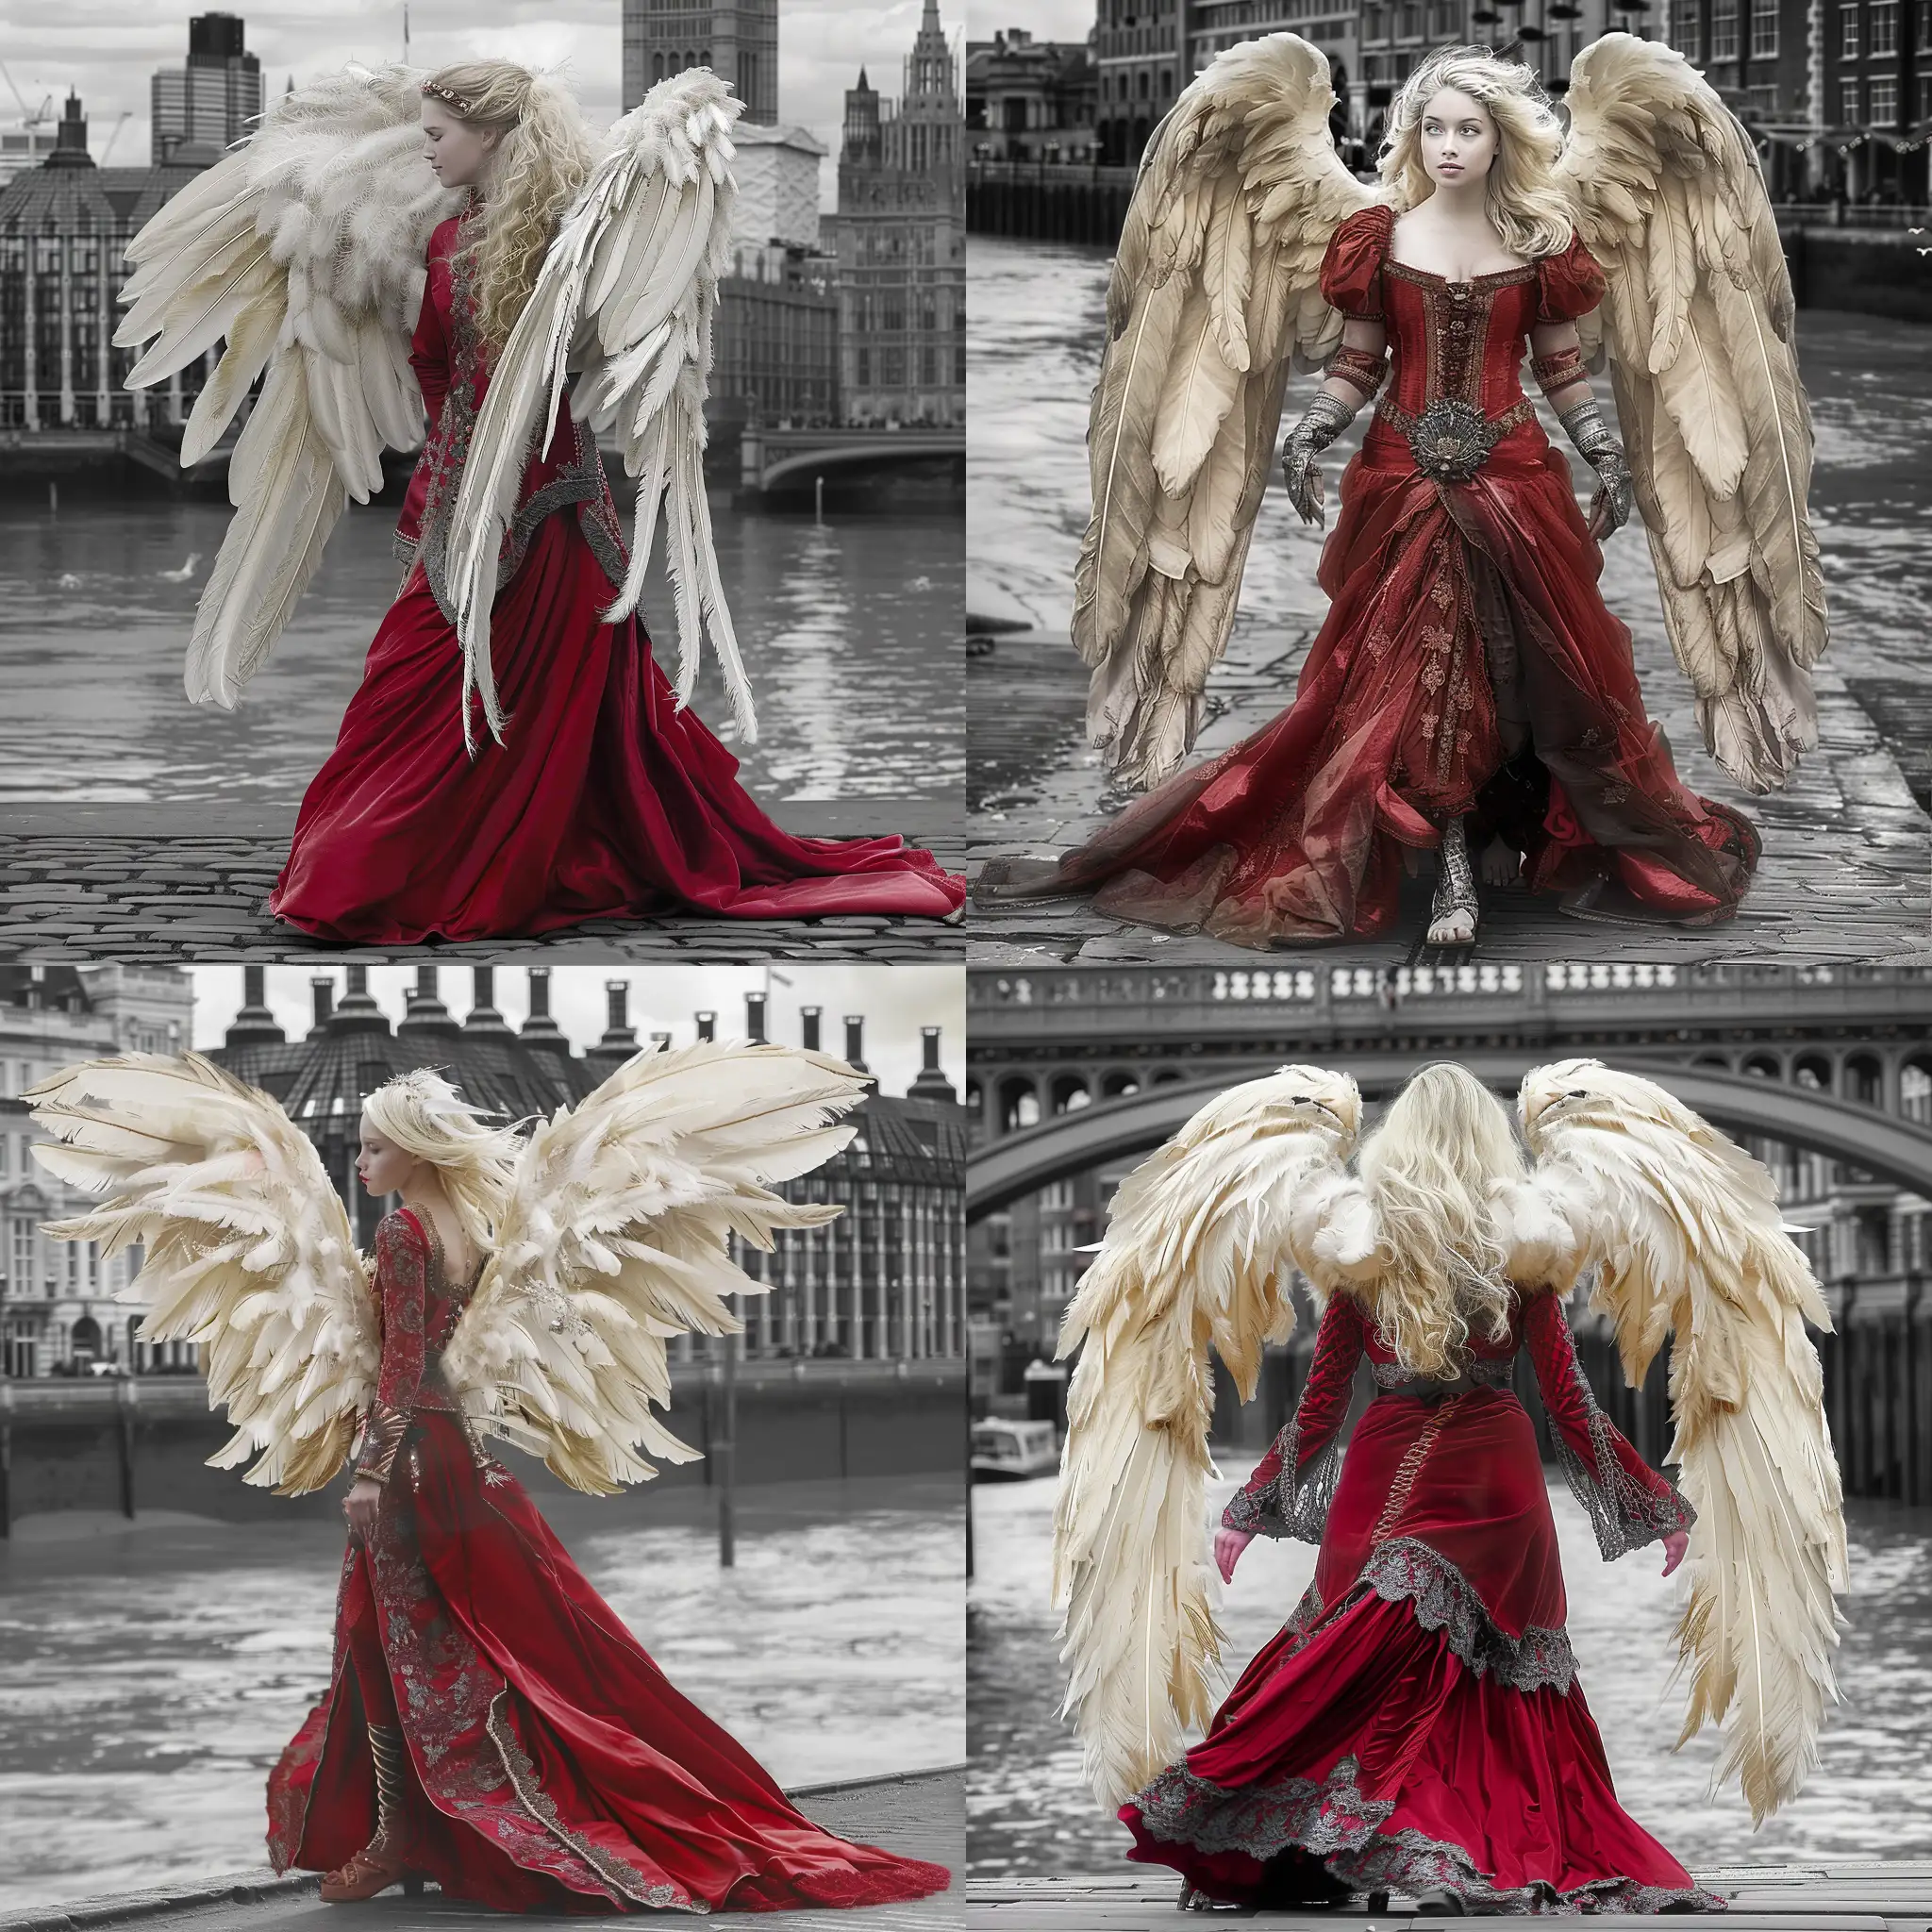 A photographic image of a beautiful woman with blonde , large cream feathered angel wings wearing a red medieval dress walking through black and white central London by the Thames. Beautiful magical mysterious fantasy surreal highly detailed